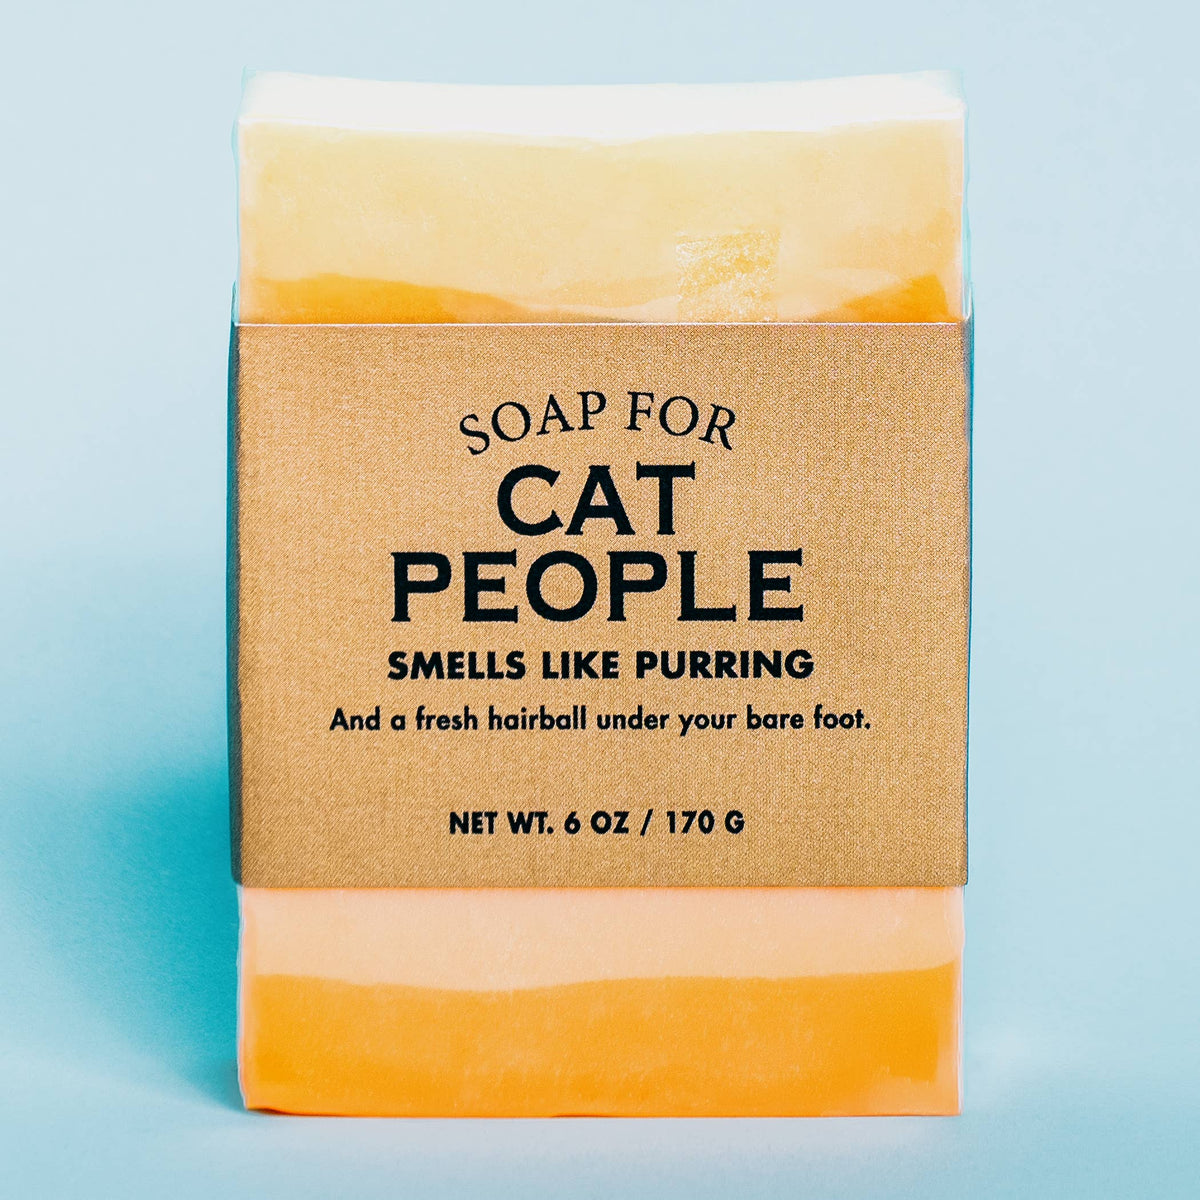 Whiskey River Soap Co. A Soap for Cat People | Funny Soap